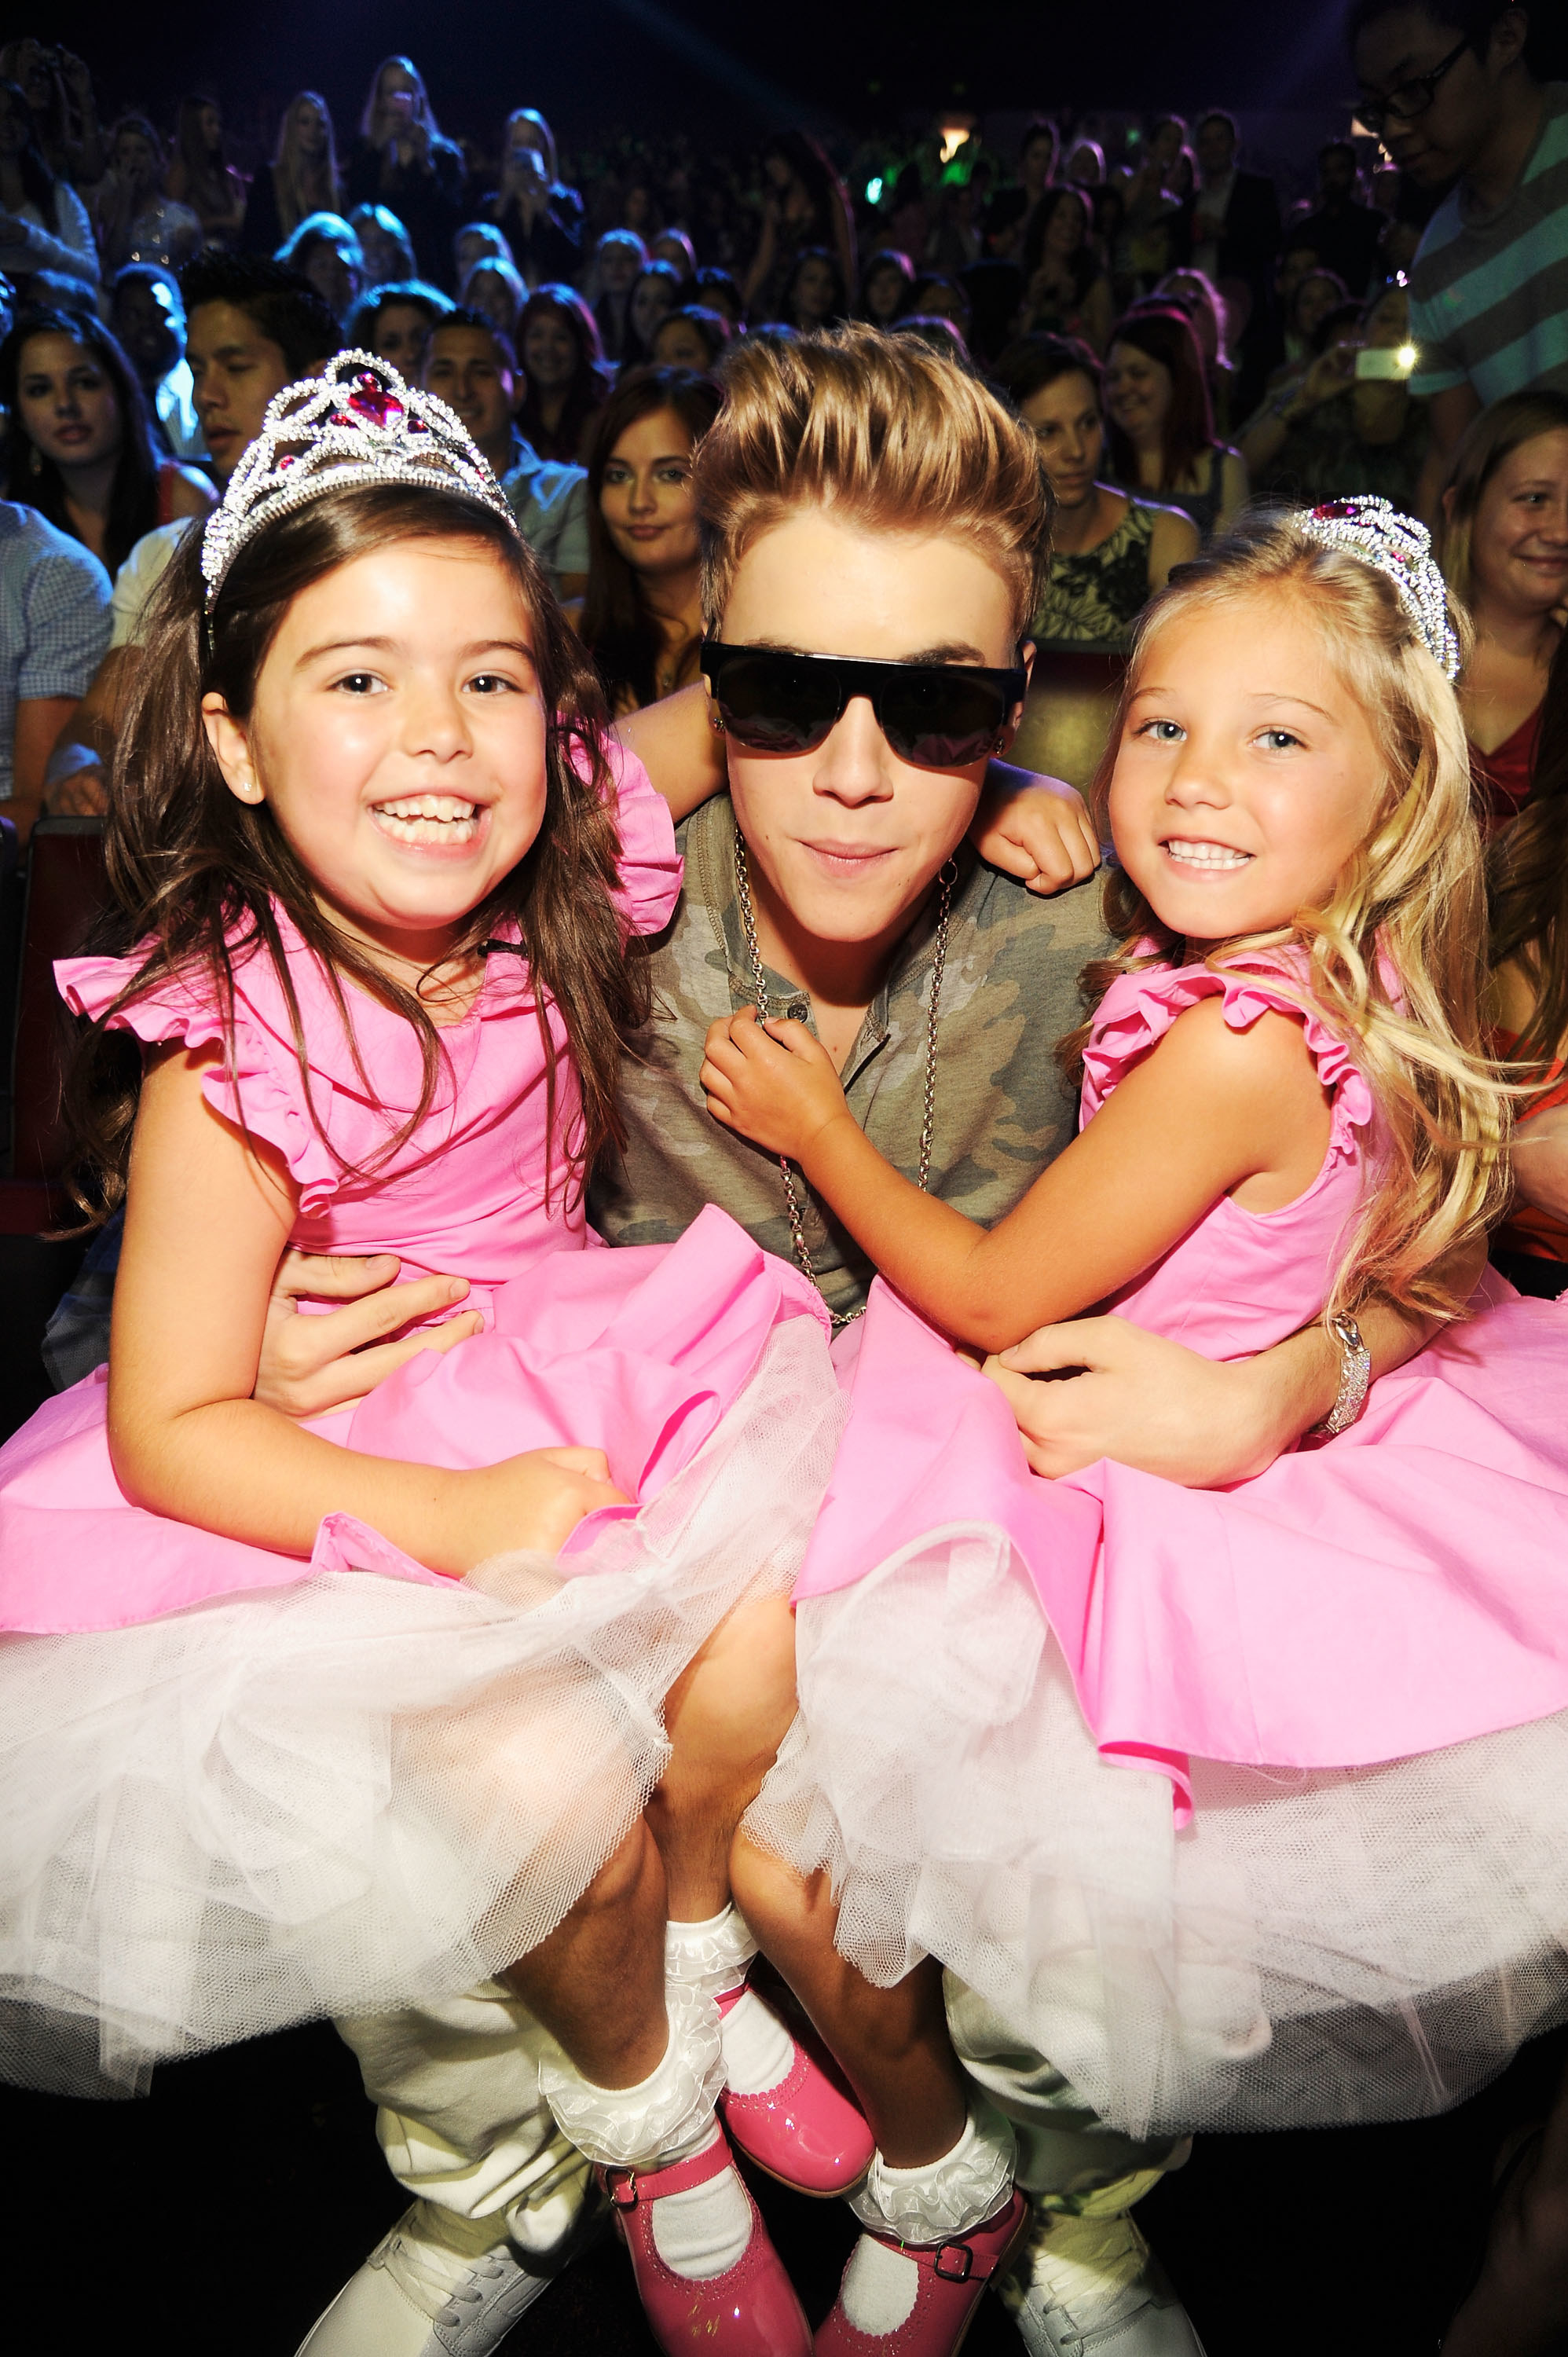 justin bieber with the girls